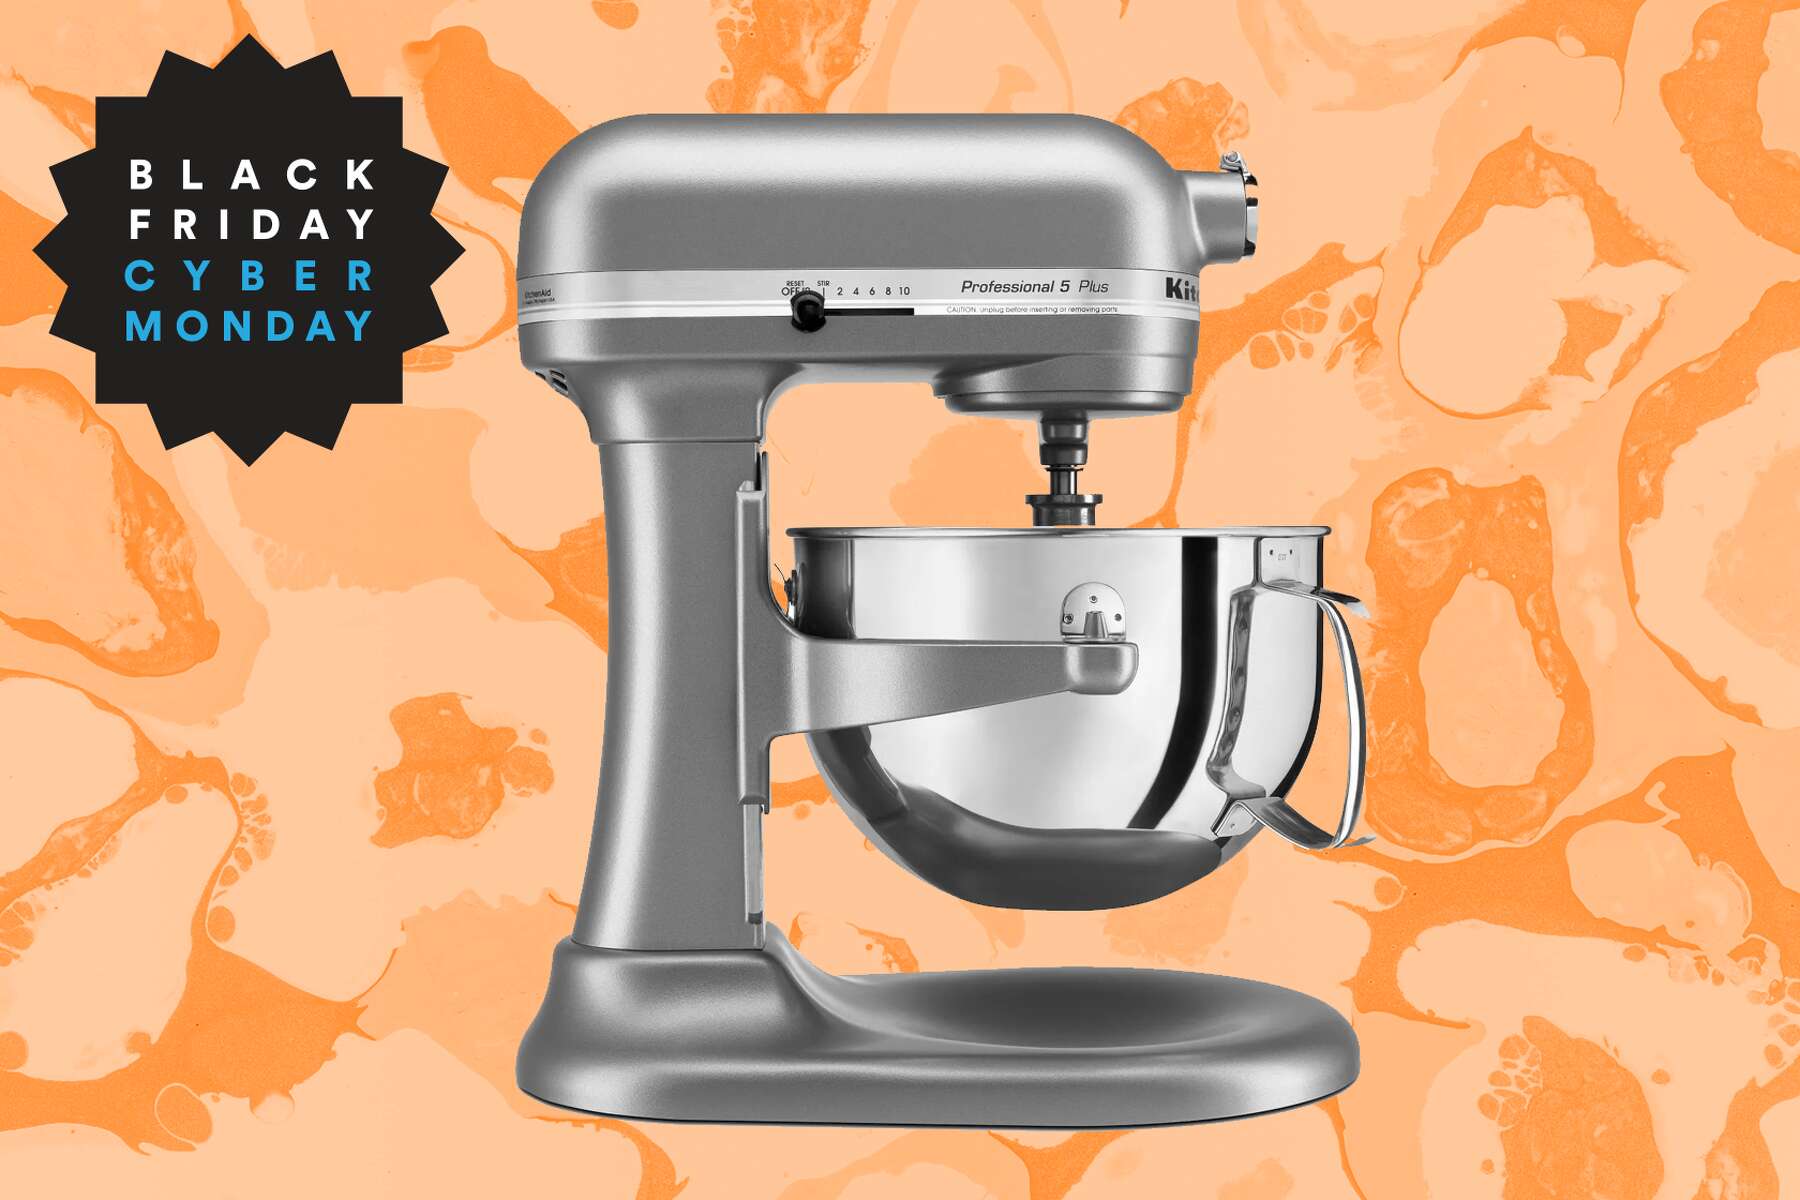 Target has a KitchenAid 5-qt. Professional stand mixer for $219.99